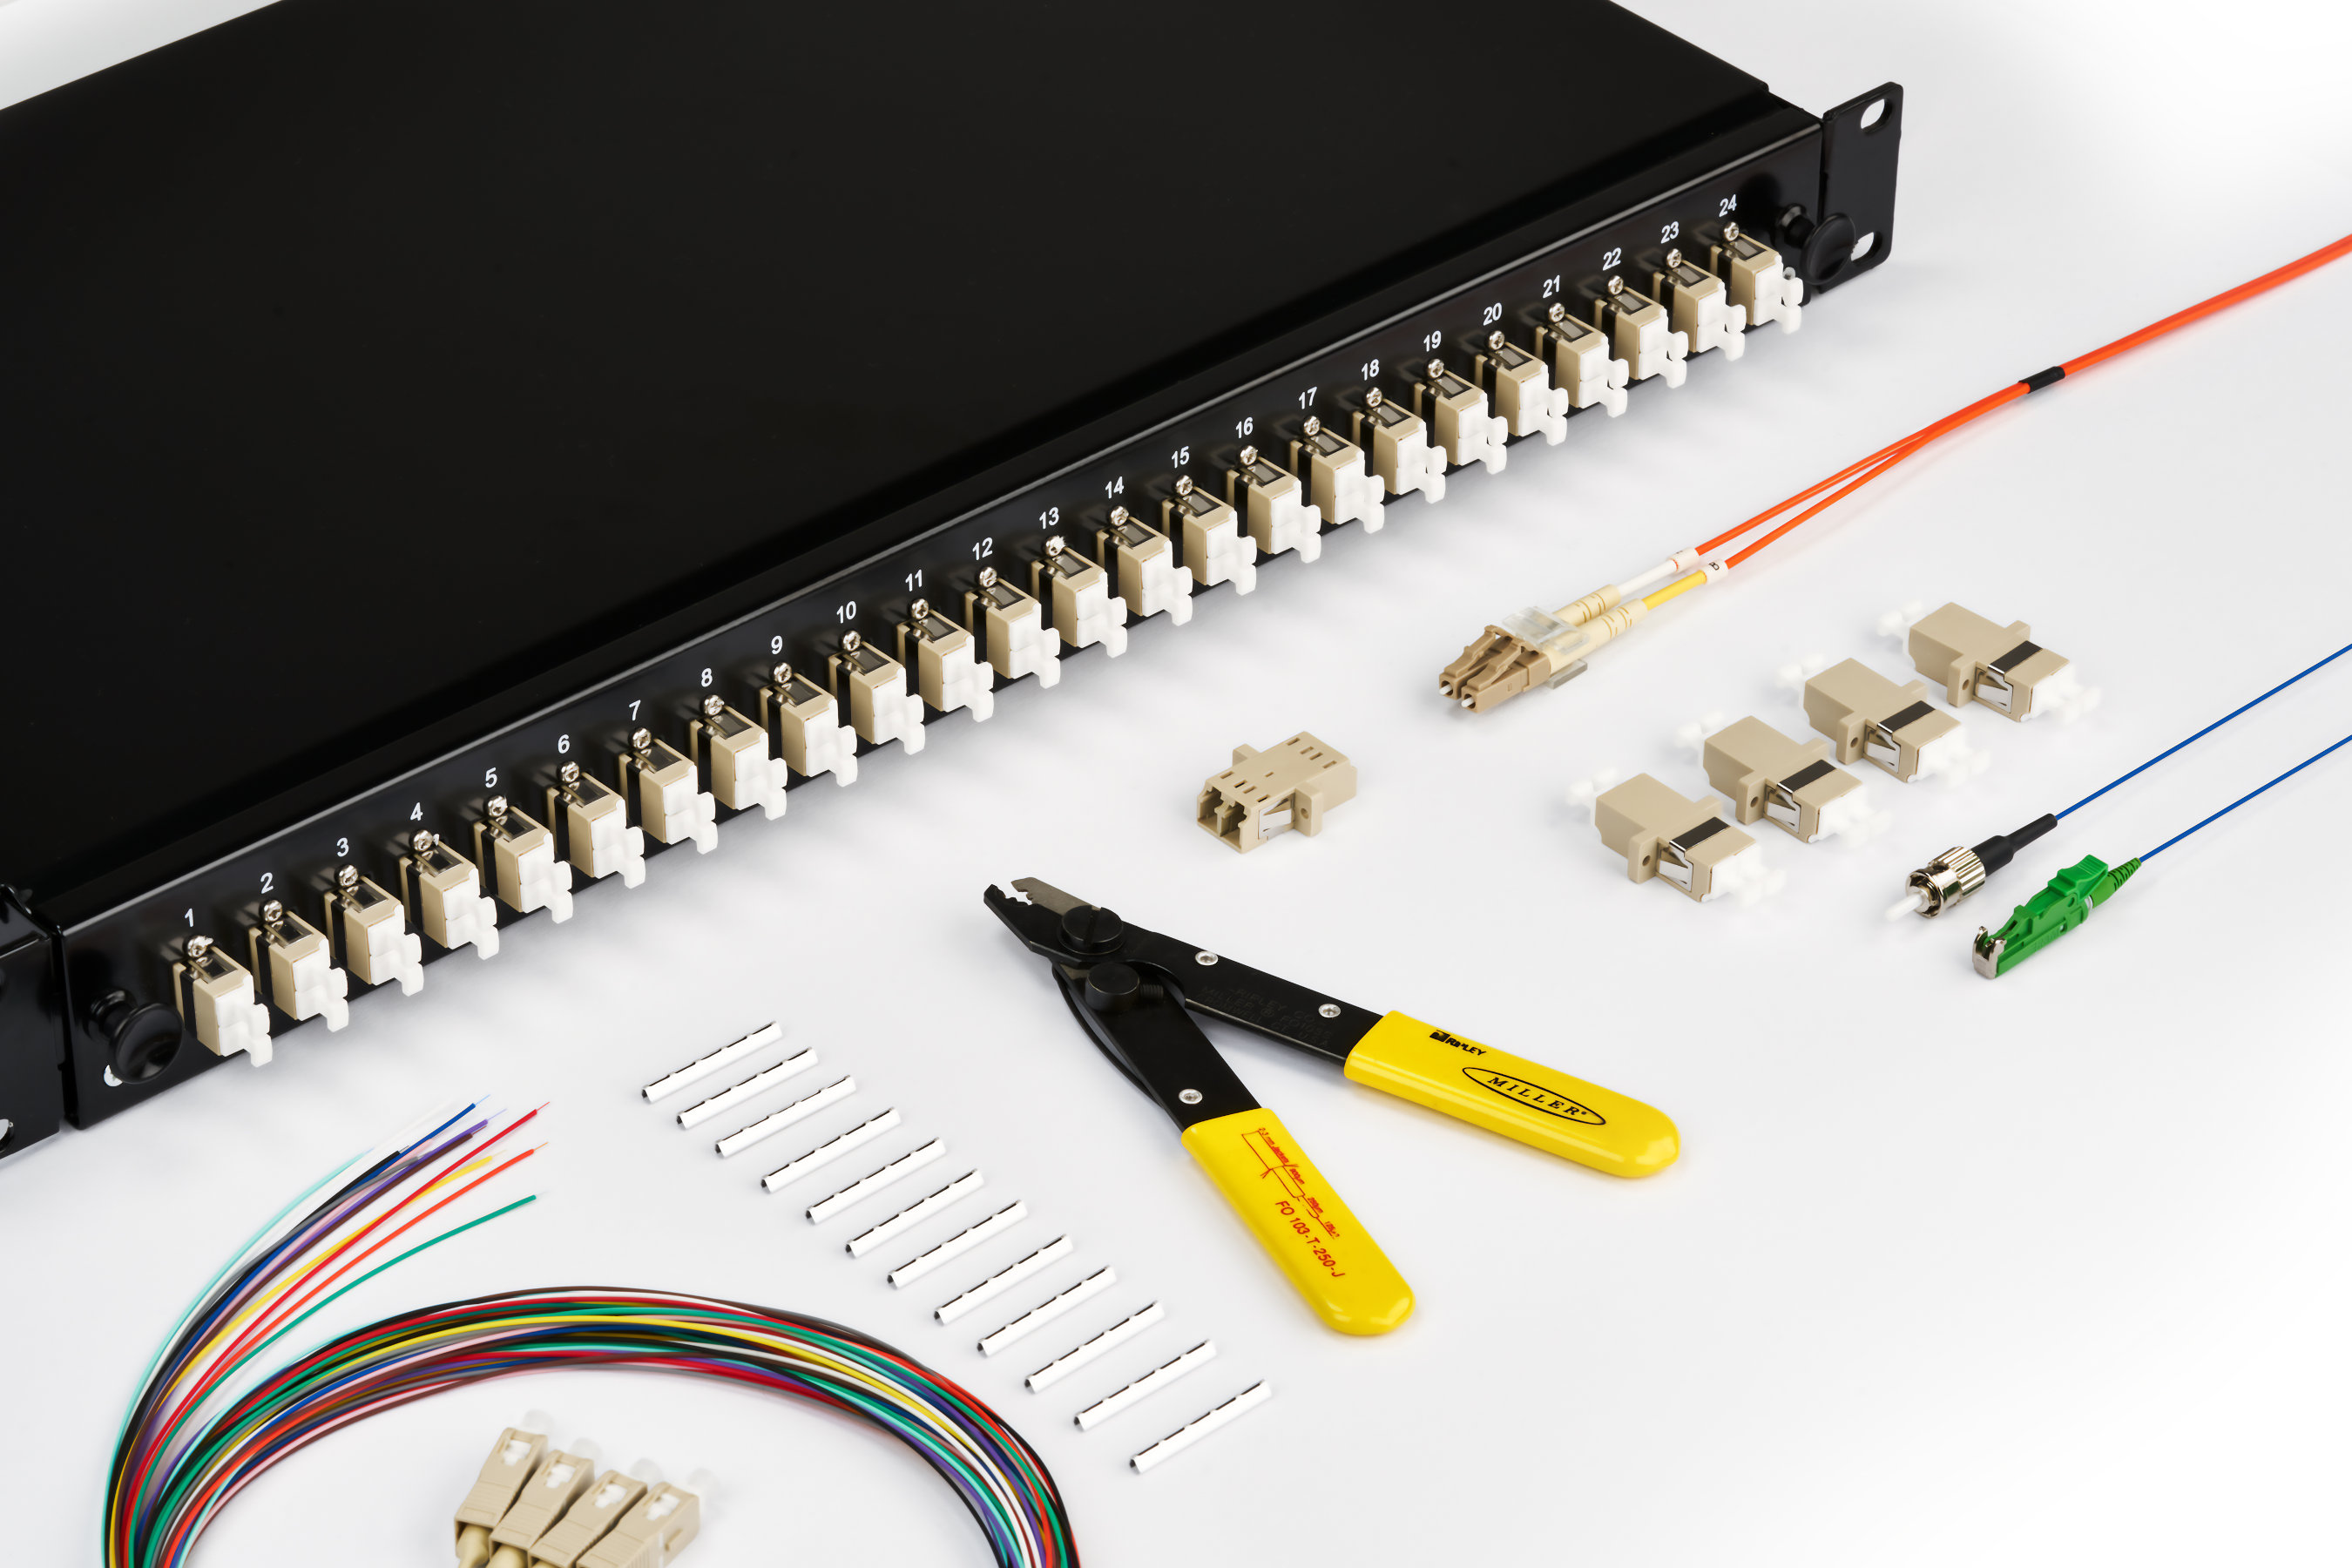 Fiber optic cabling kit with patch panel, fiber optic cables, connectors, stripping tool and adapters.